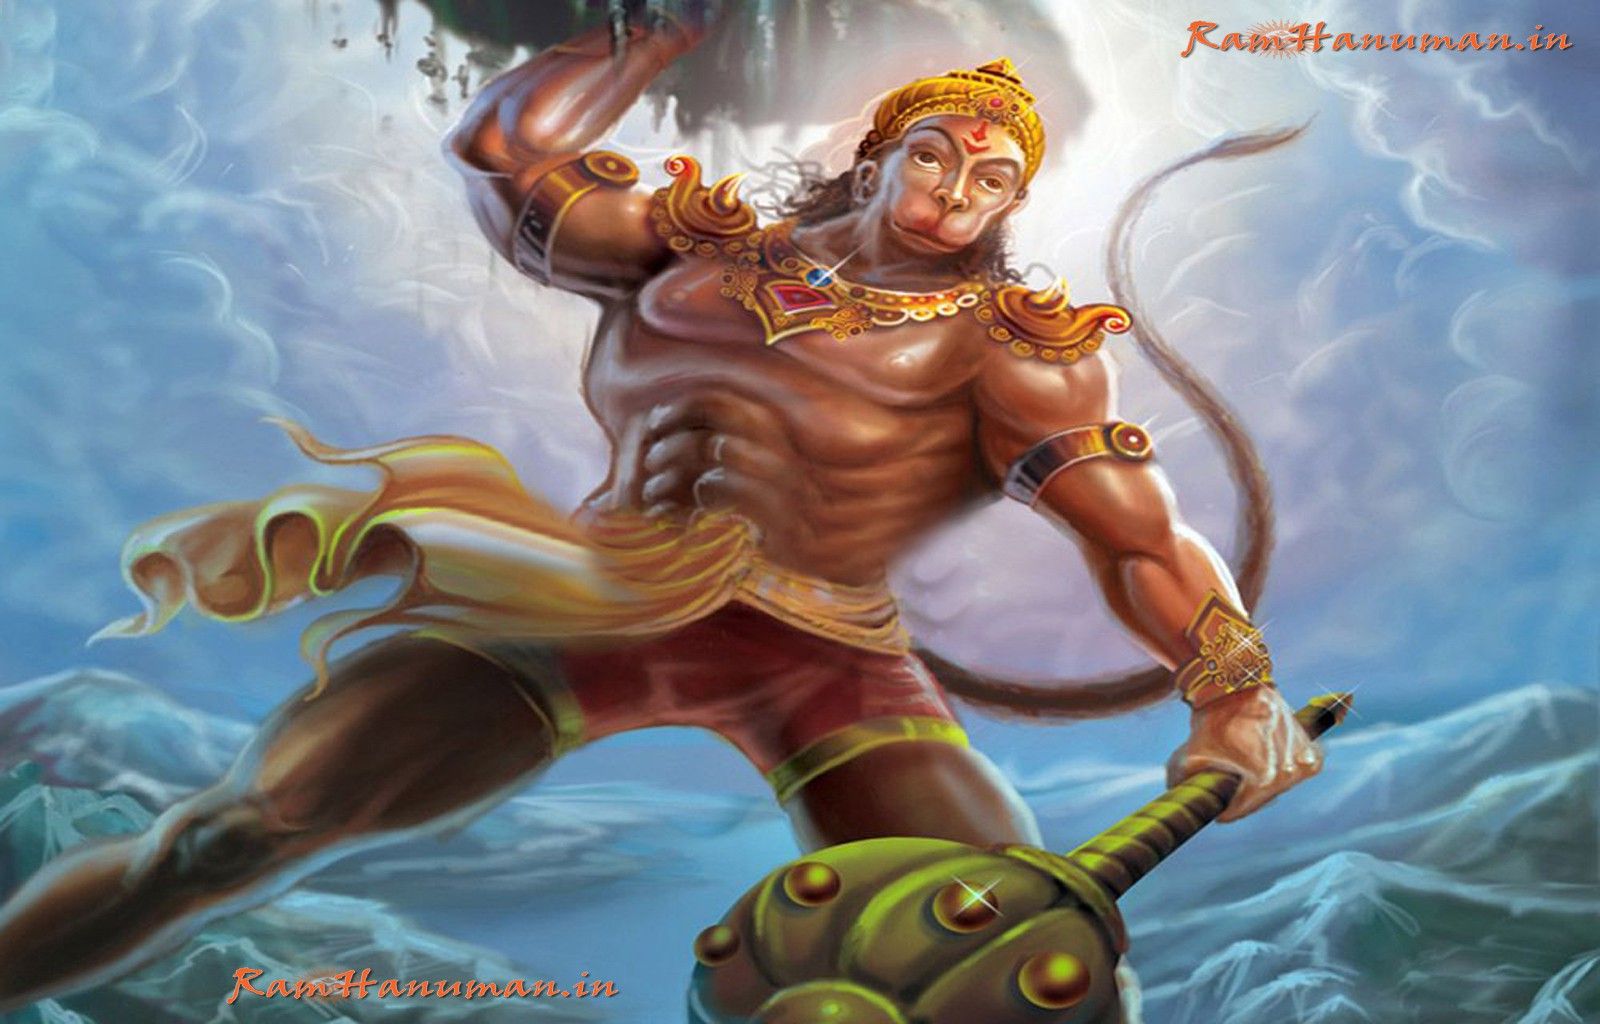 Best Lord Hanuman Angry wallpaper HD Free Download in High Quality